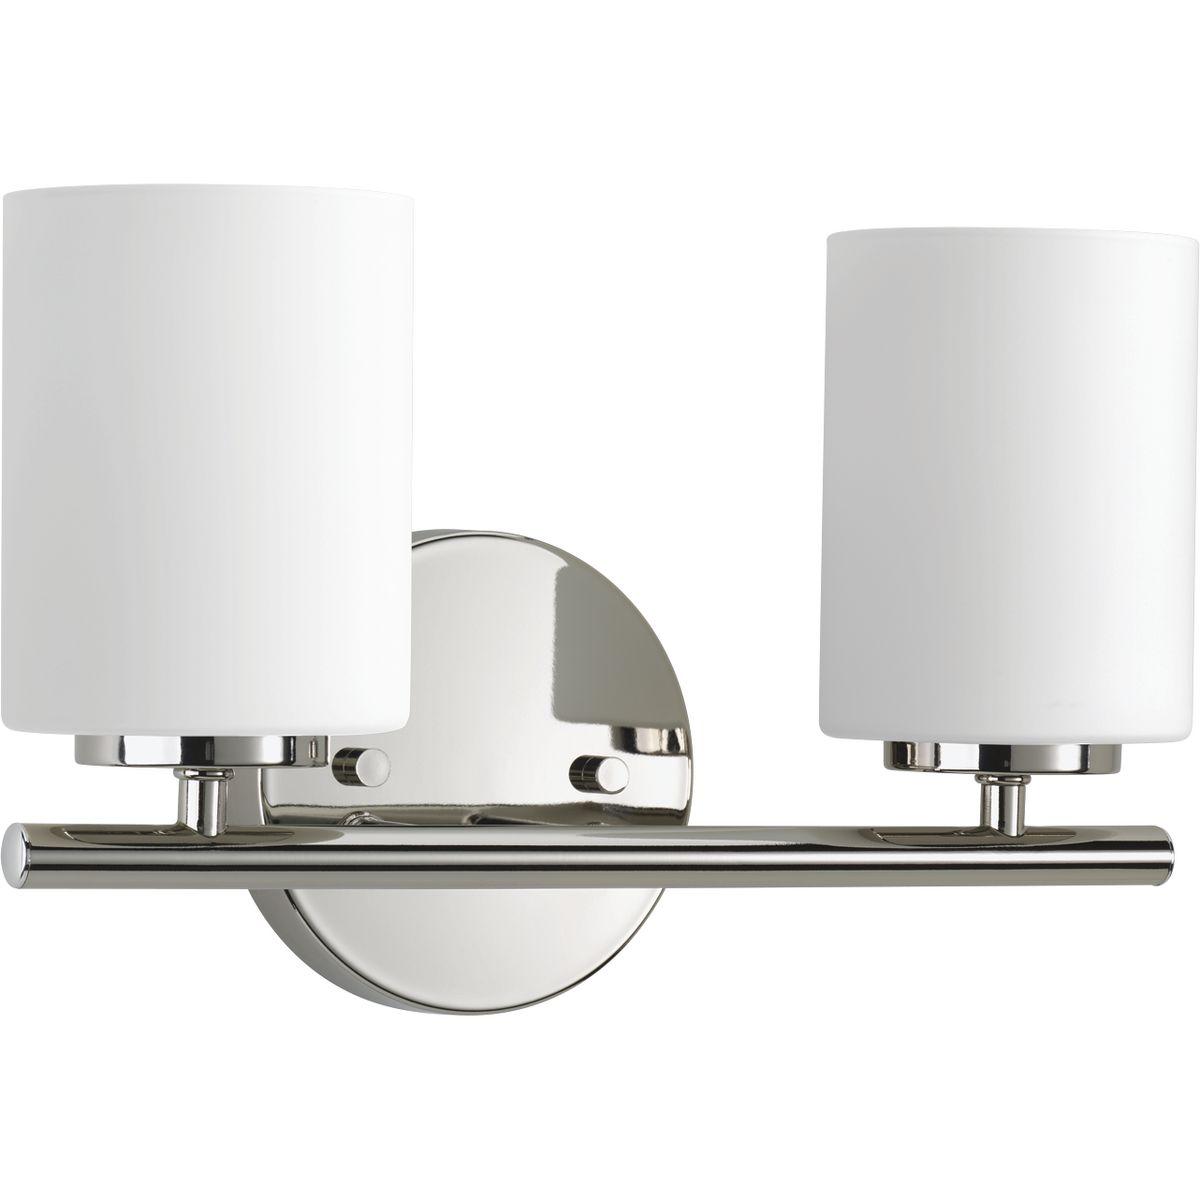 Hubbell P2158-104 Two-light bath & vanity from the Replay Collection, smooth forms, linear details and a pleasingly elegant frame enhance a simplified modern look. Fixture can be mounted up or down. Polished Nickel finish.  ; Ideal for a bathroom and powder room. ; Perfect